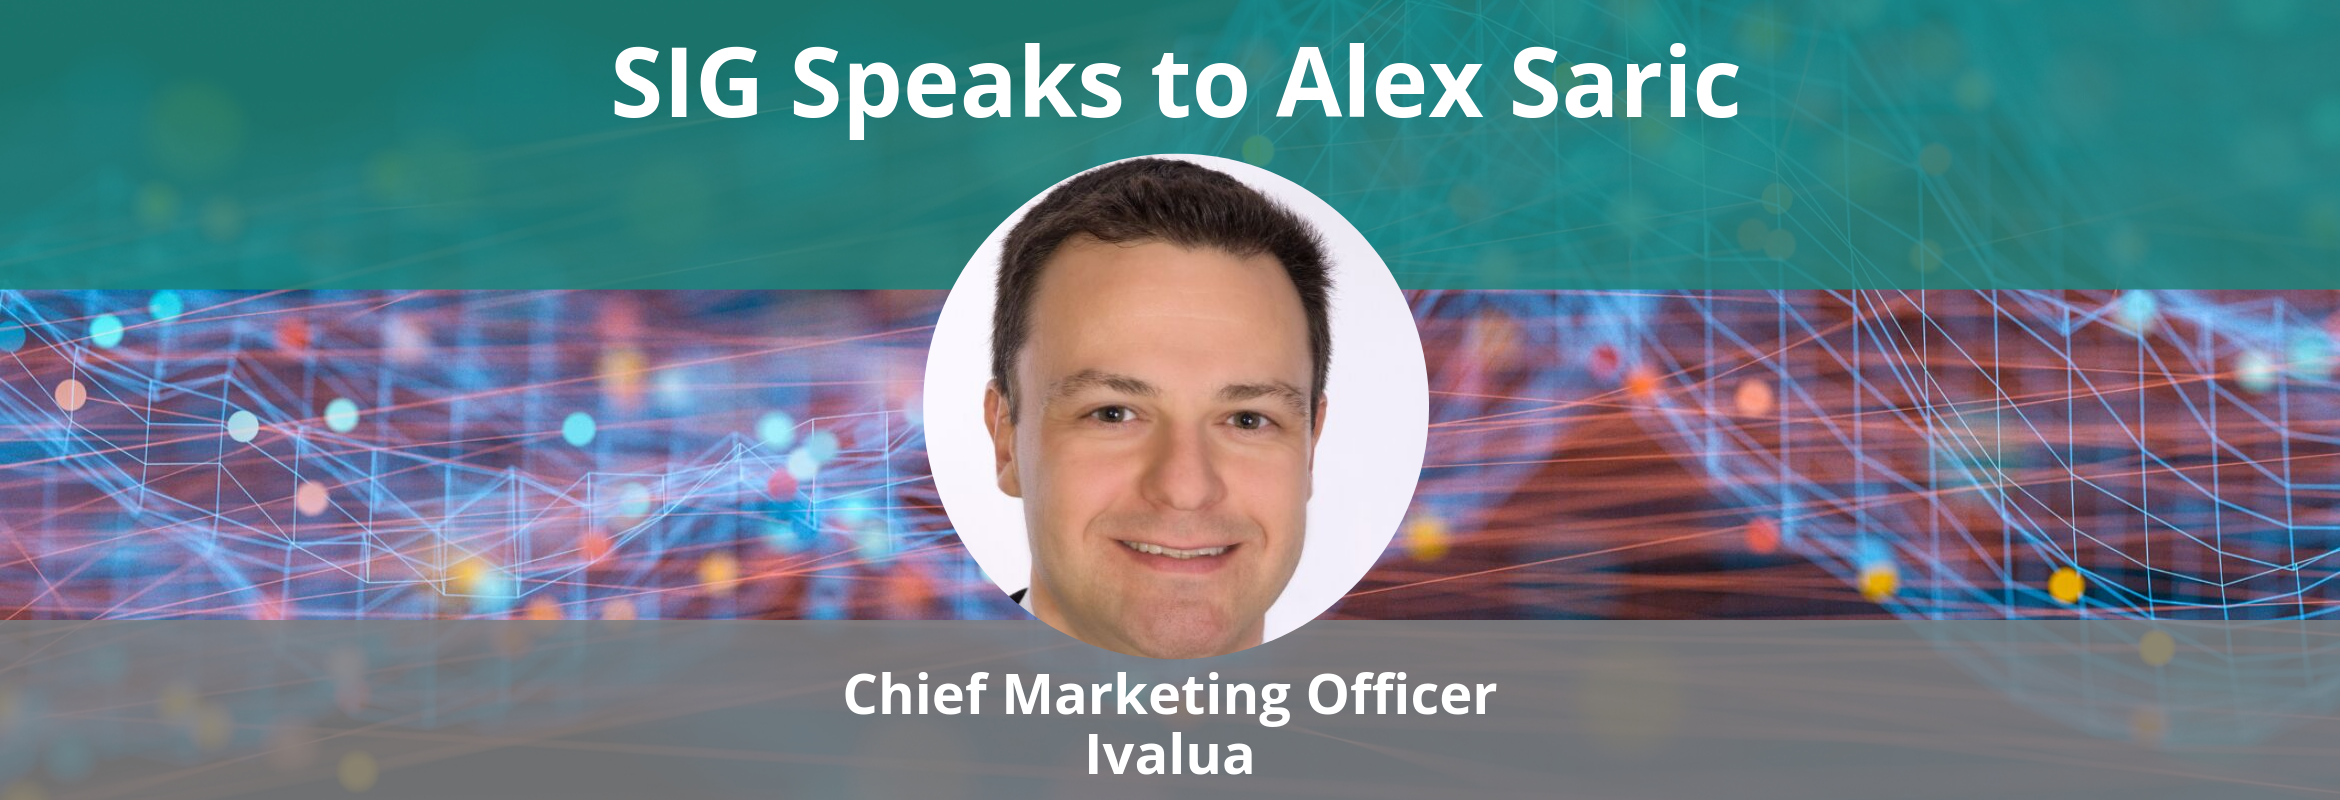 Alex Saric is the Chief Marketing Officer at Ivalua.